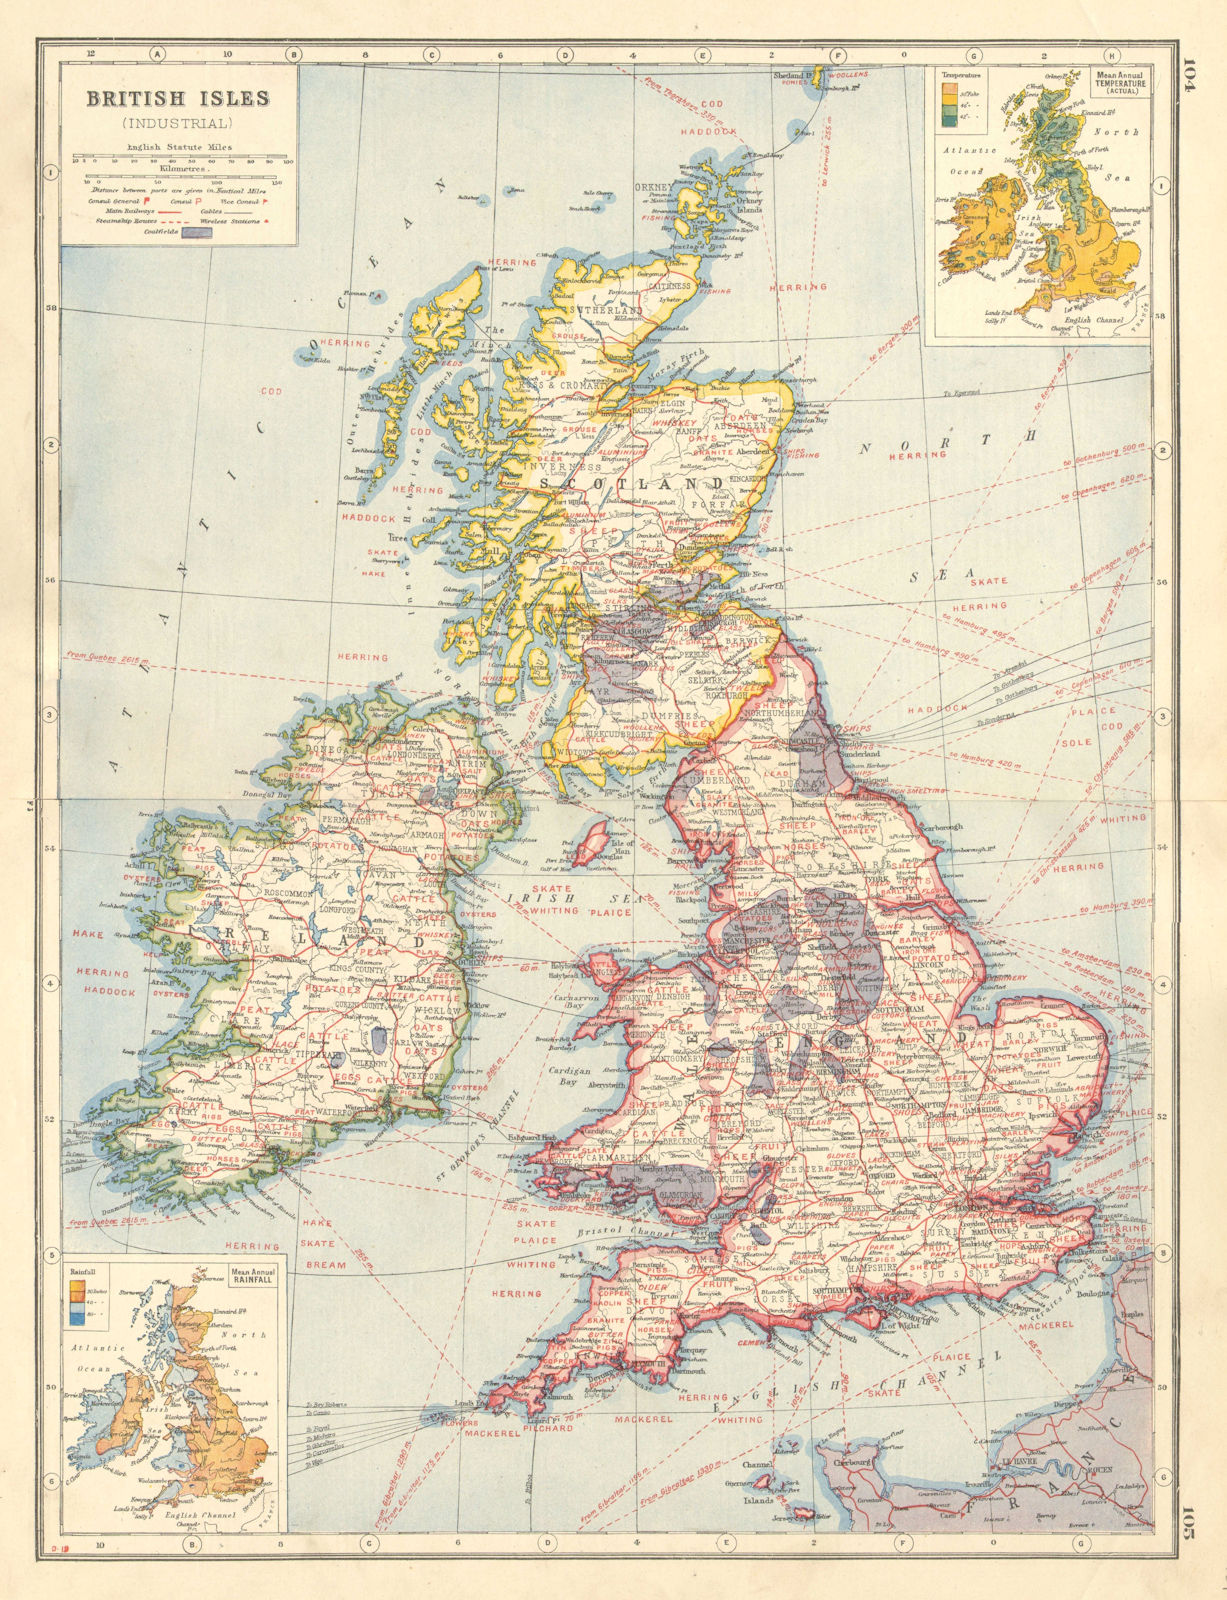 Associate Product BRITISH ISLES AGRICULTURAL/INDUSTRIAL. Showing key products coalfields 1920 map